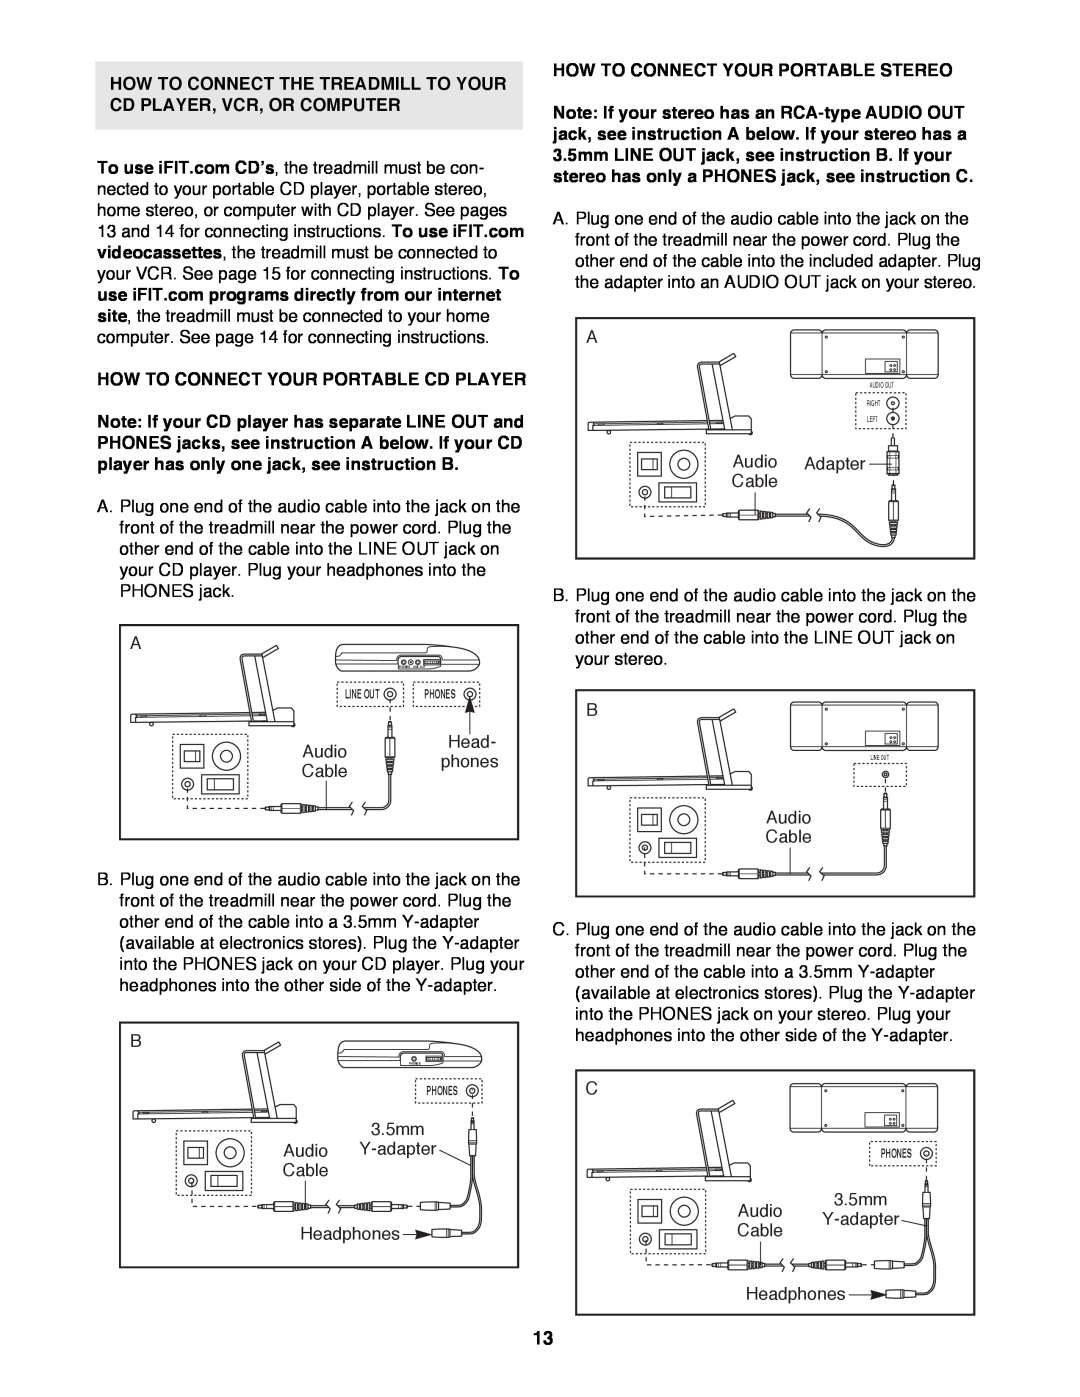 ProForm 831.299460 How To Connect The Treadmill To Your Cd Player, Vcr, Or Computer, How To Connect Your Portable Stereo 